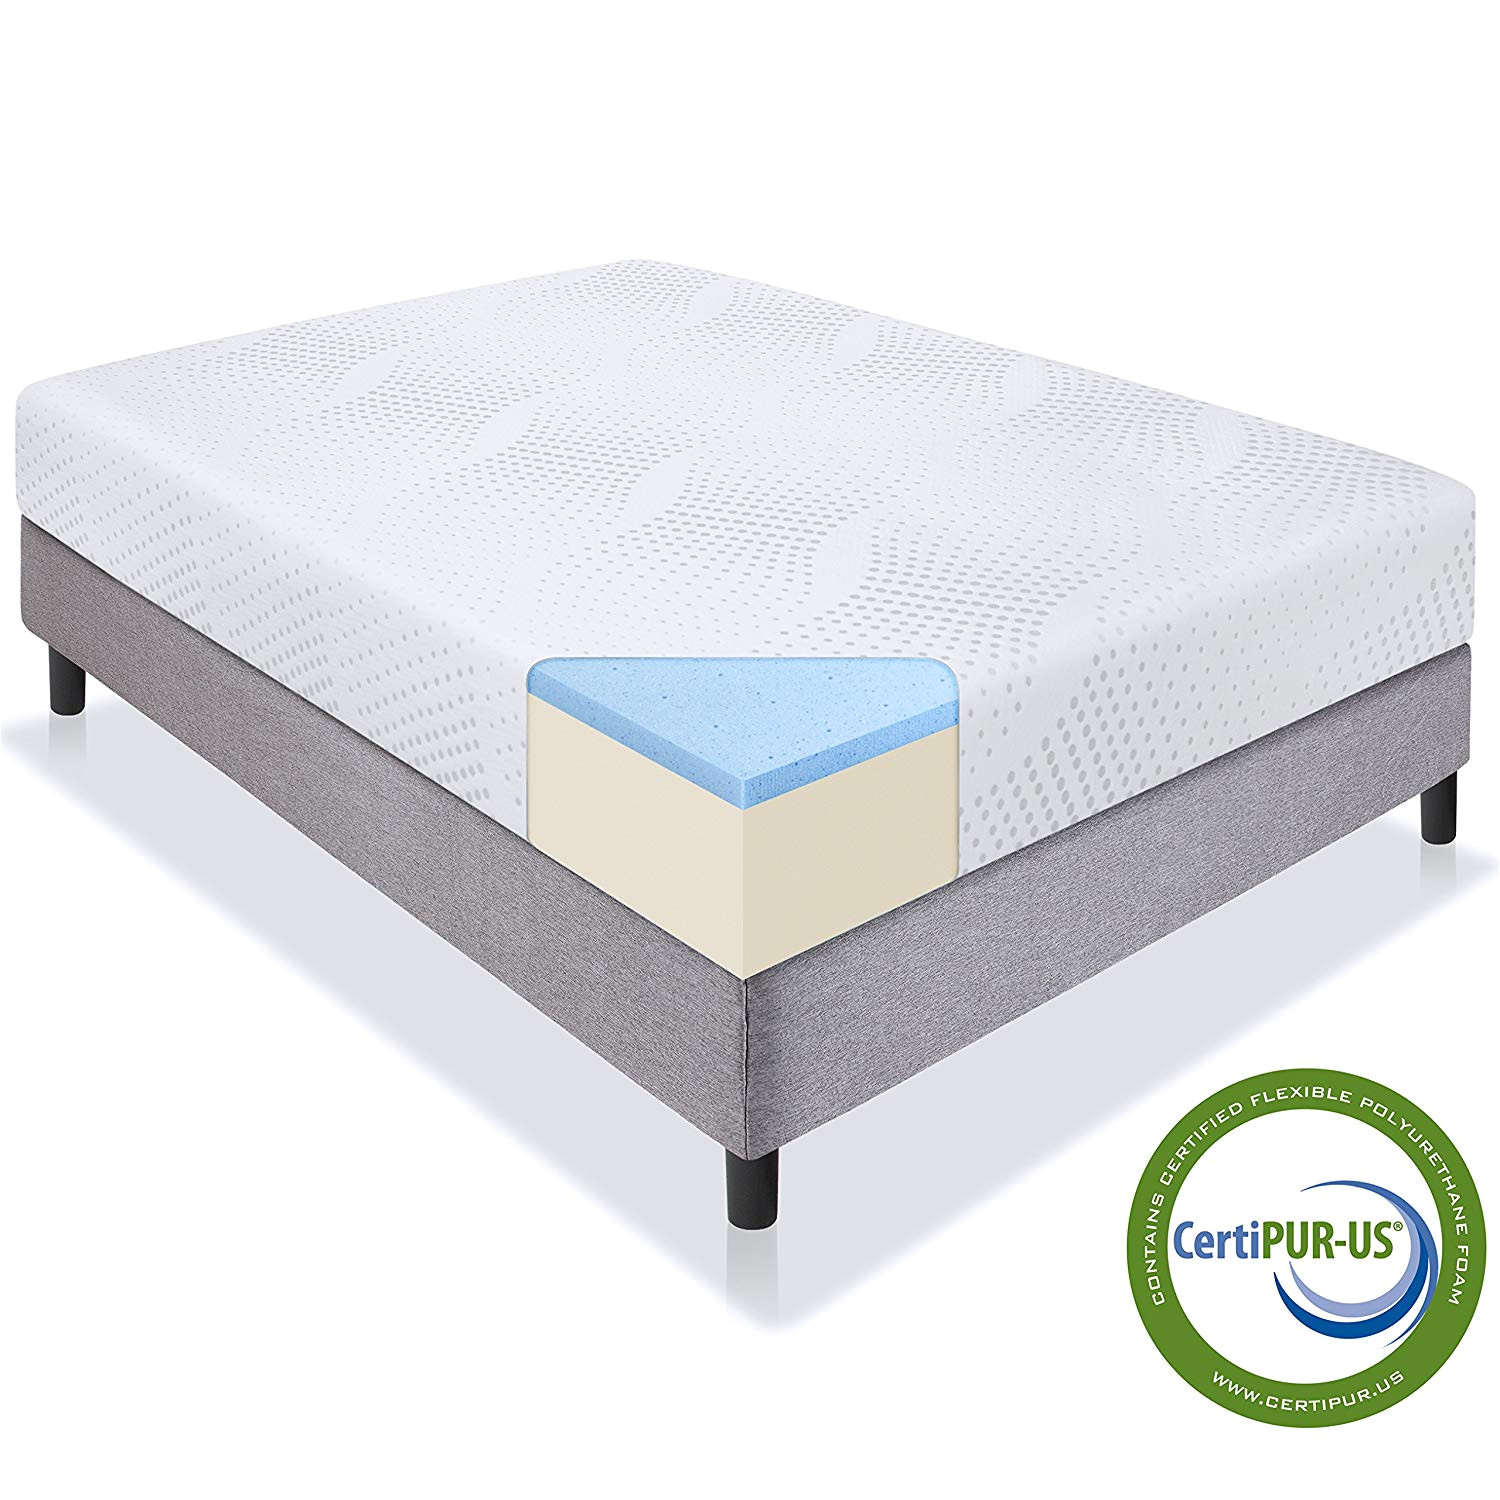 amazon com best choice products 10 dual layered gel memory foam mattress twin certipur us home kitchen